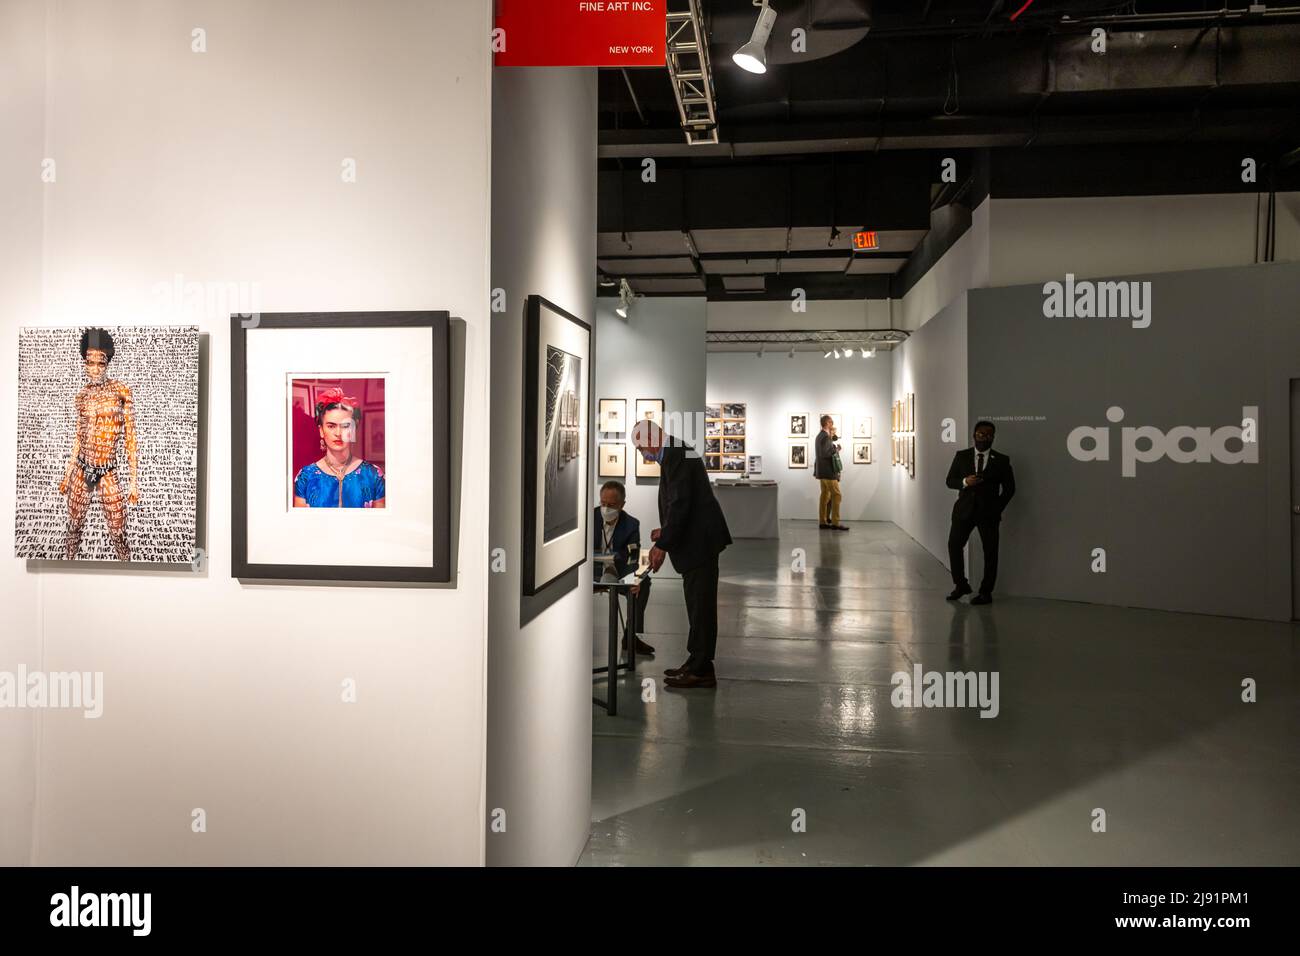 New York, USA. 19th May, 2022. The Photography Show presented by AIPAD (Association of International Photography Art Dealers) opened today in New York City. The show brings together 49 of the world's leading galleries of fine art photography. Credit: Enrique Shore/Alamy Live News Stock Photo